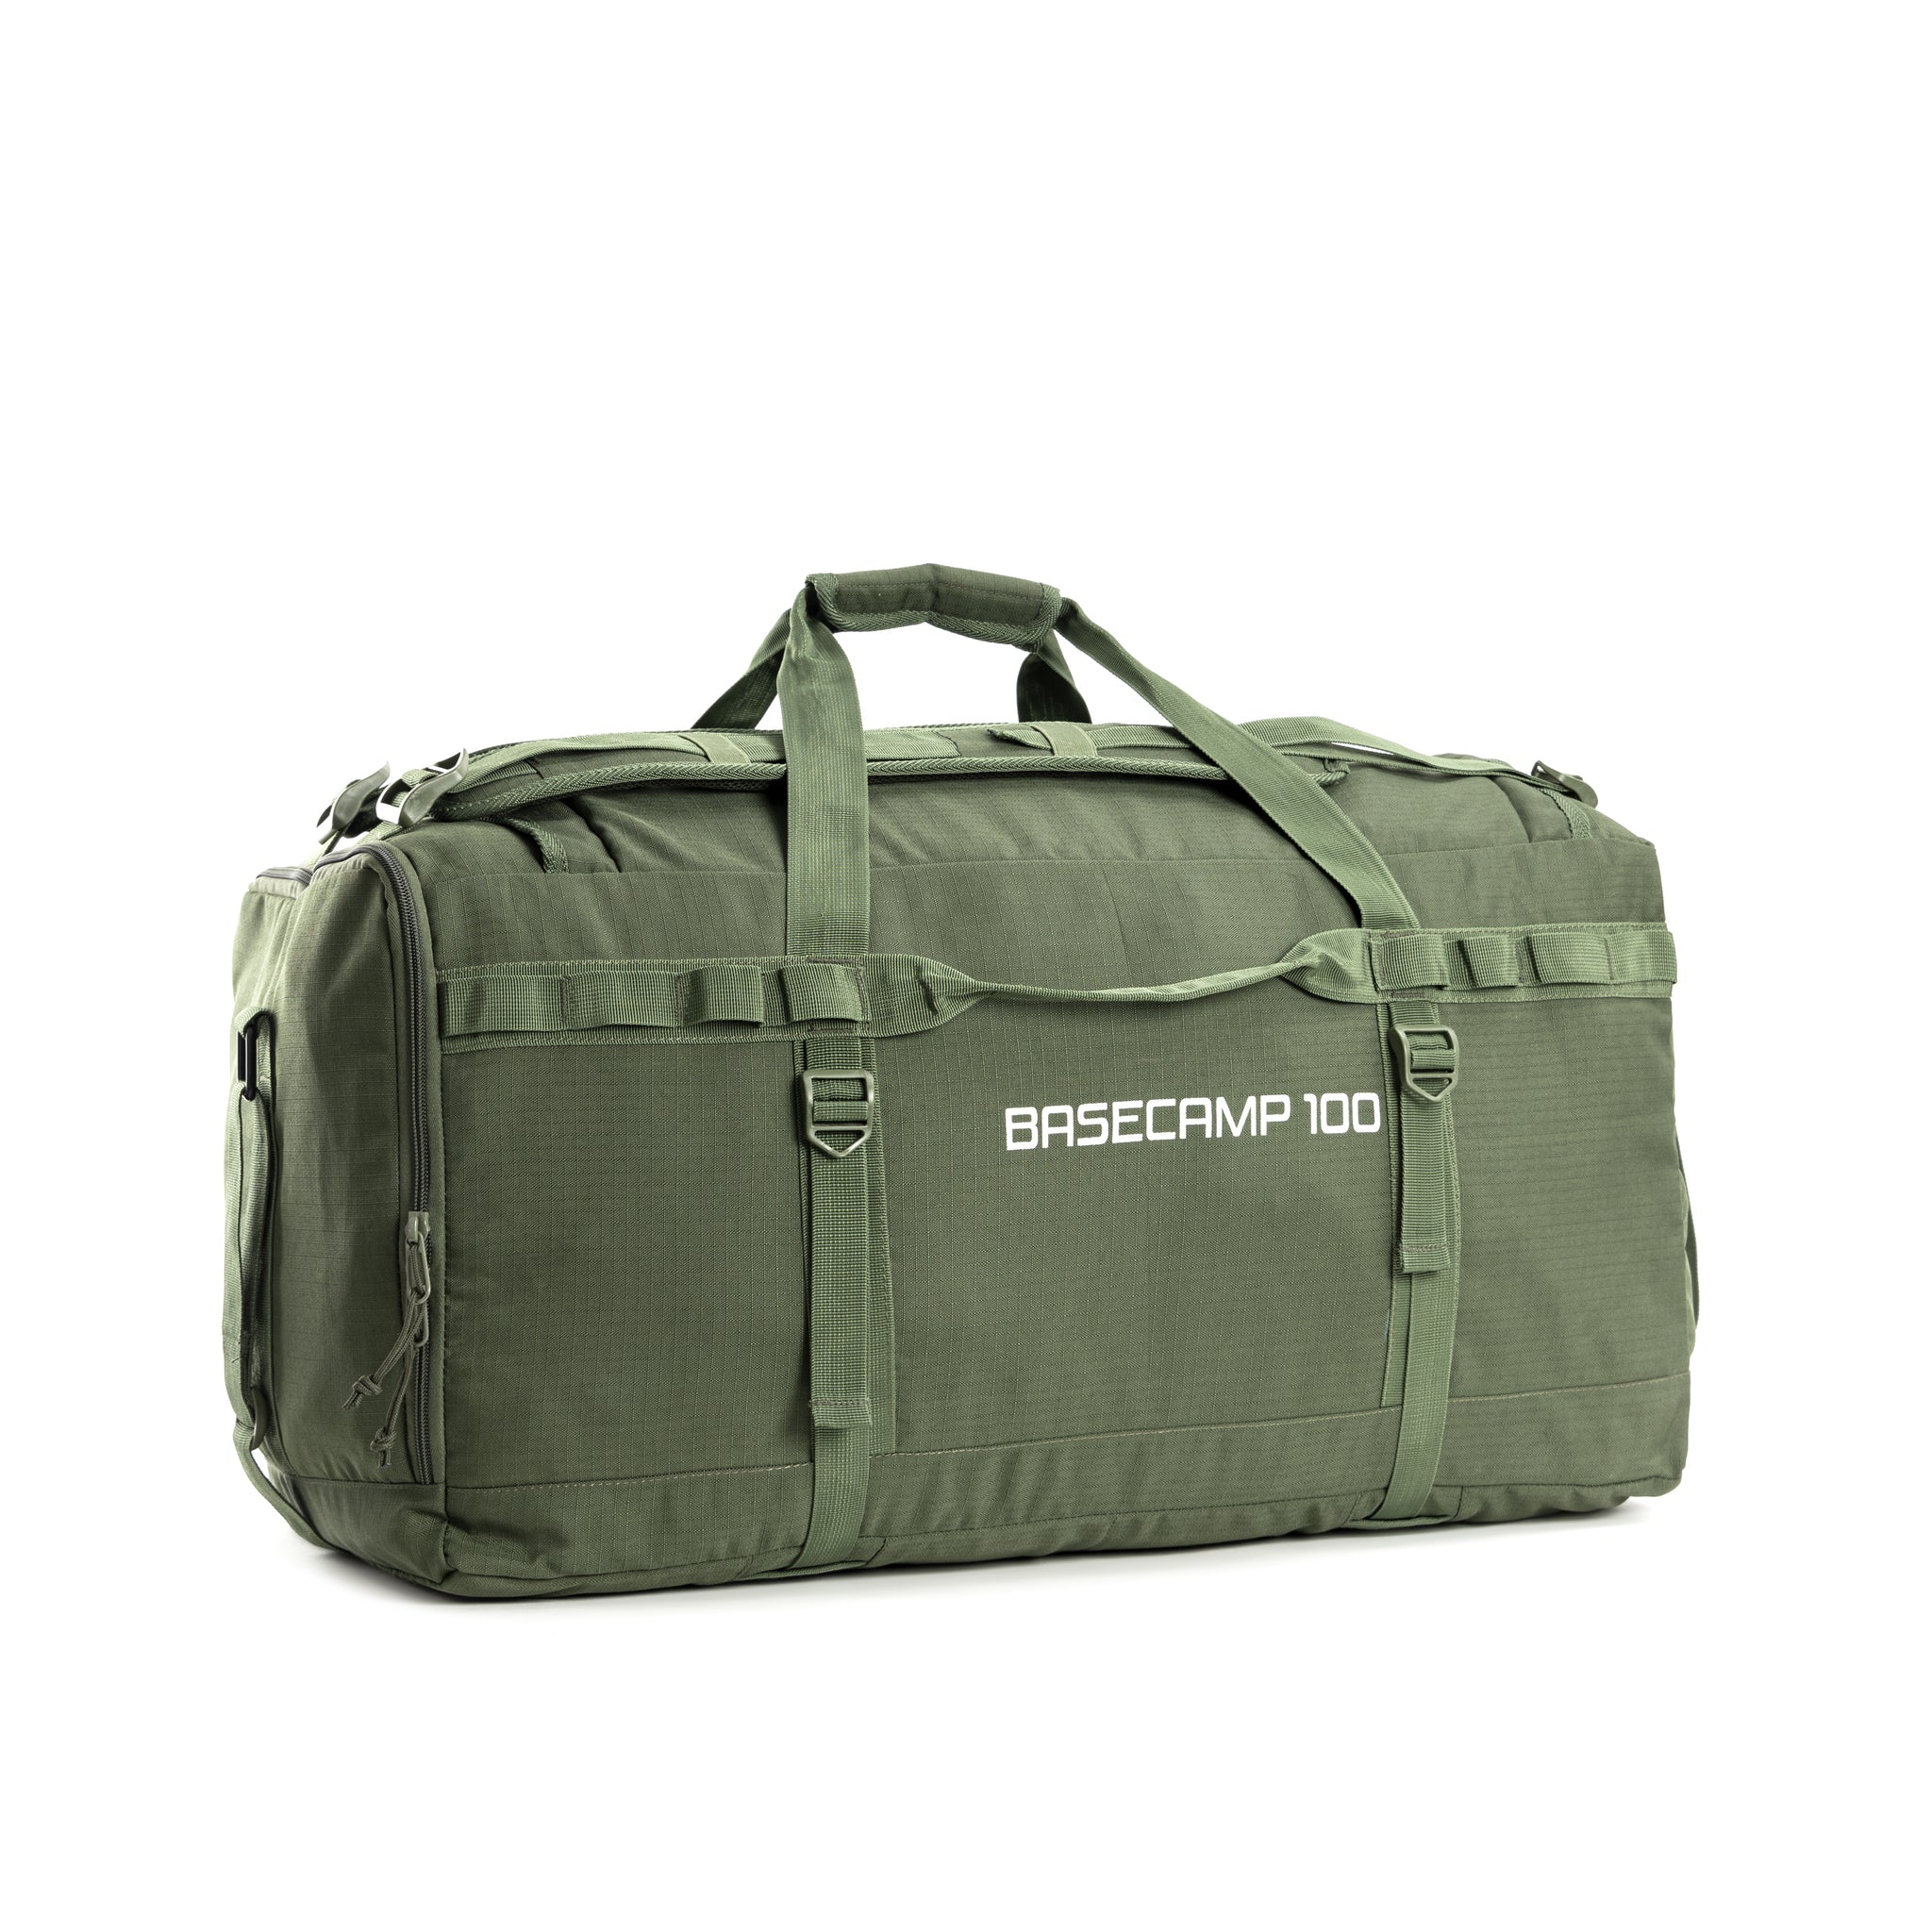 ASTRO Duffel Bag Travel Waterproof Bag With 2 Wheels For Easy Carrying  Lightweight Polyester 60 L Expandable Duffle Travel Bag, Green White, 25 Cm  : Amazon.in: Fashion